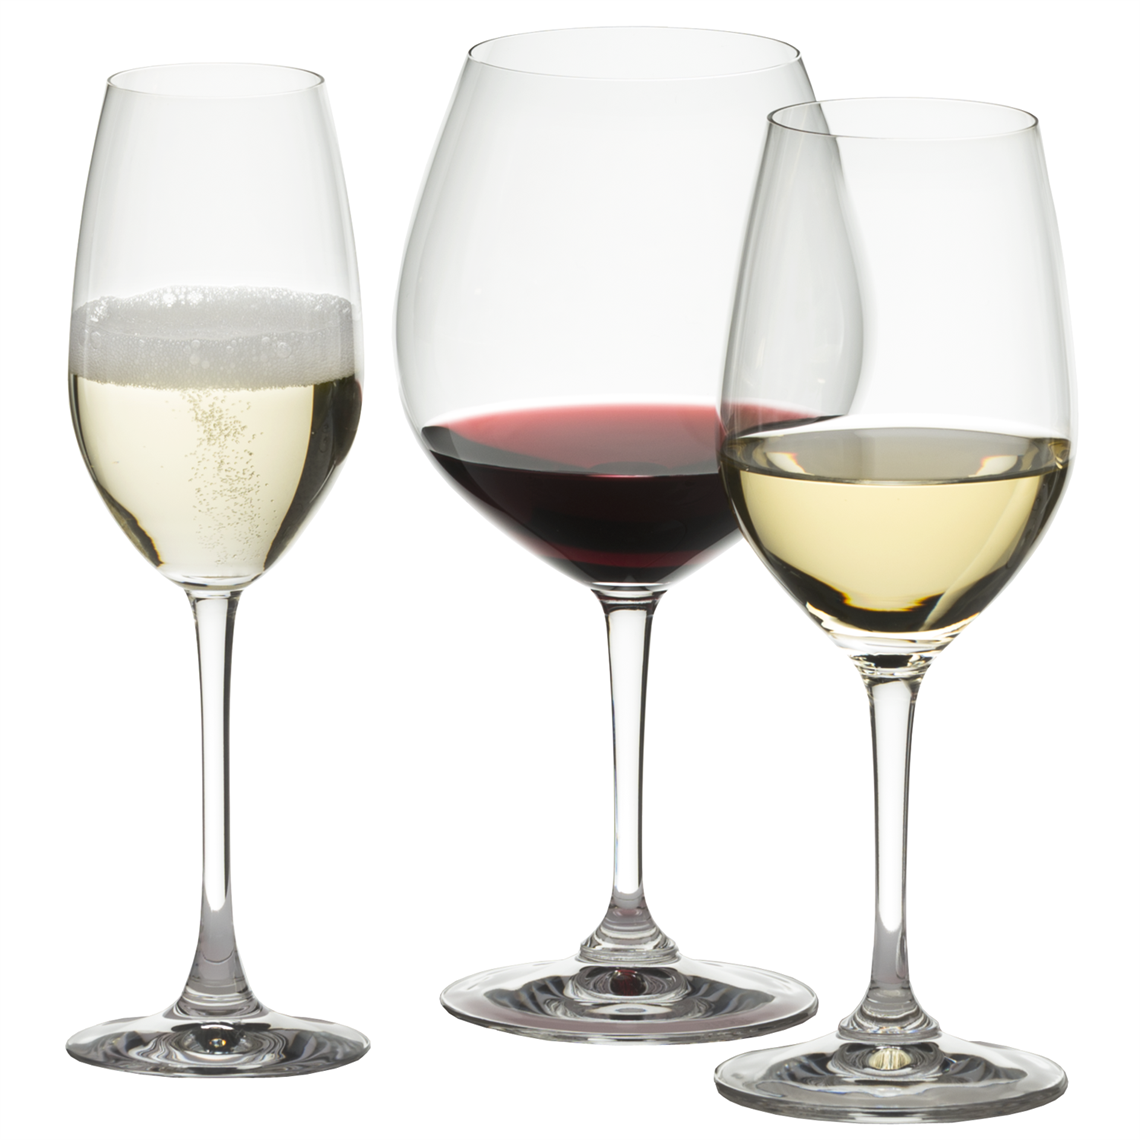 View more large wine glasses from our Restaurant & Trade Glasses range